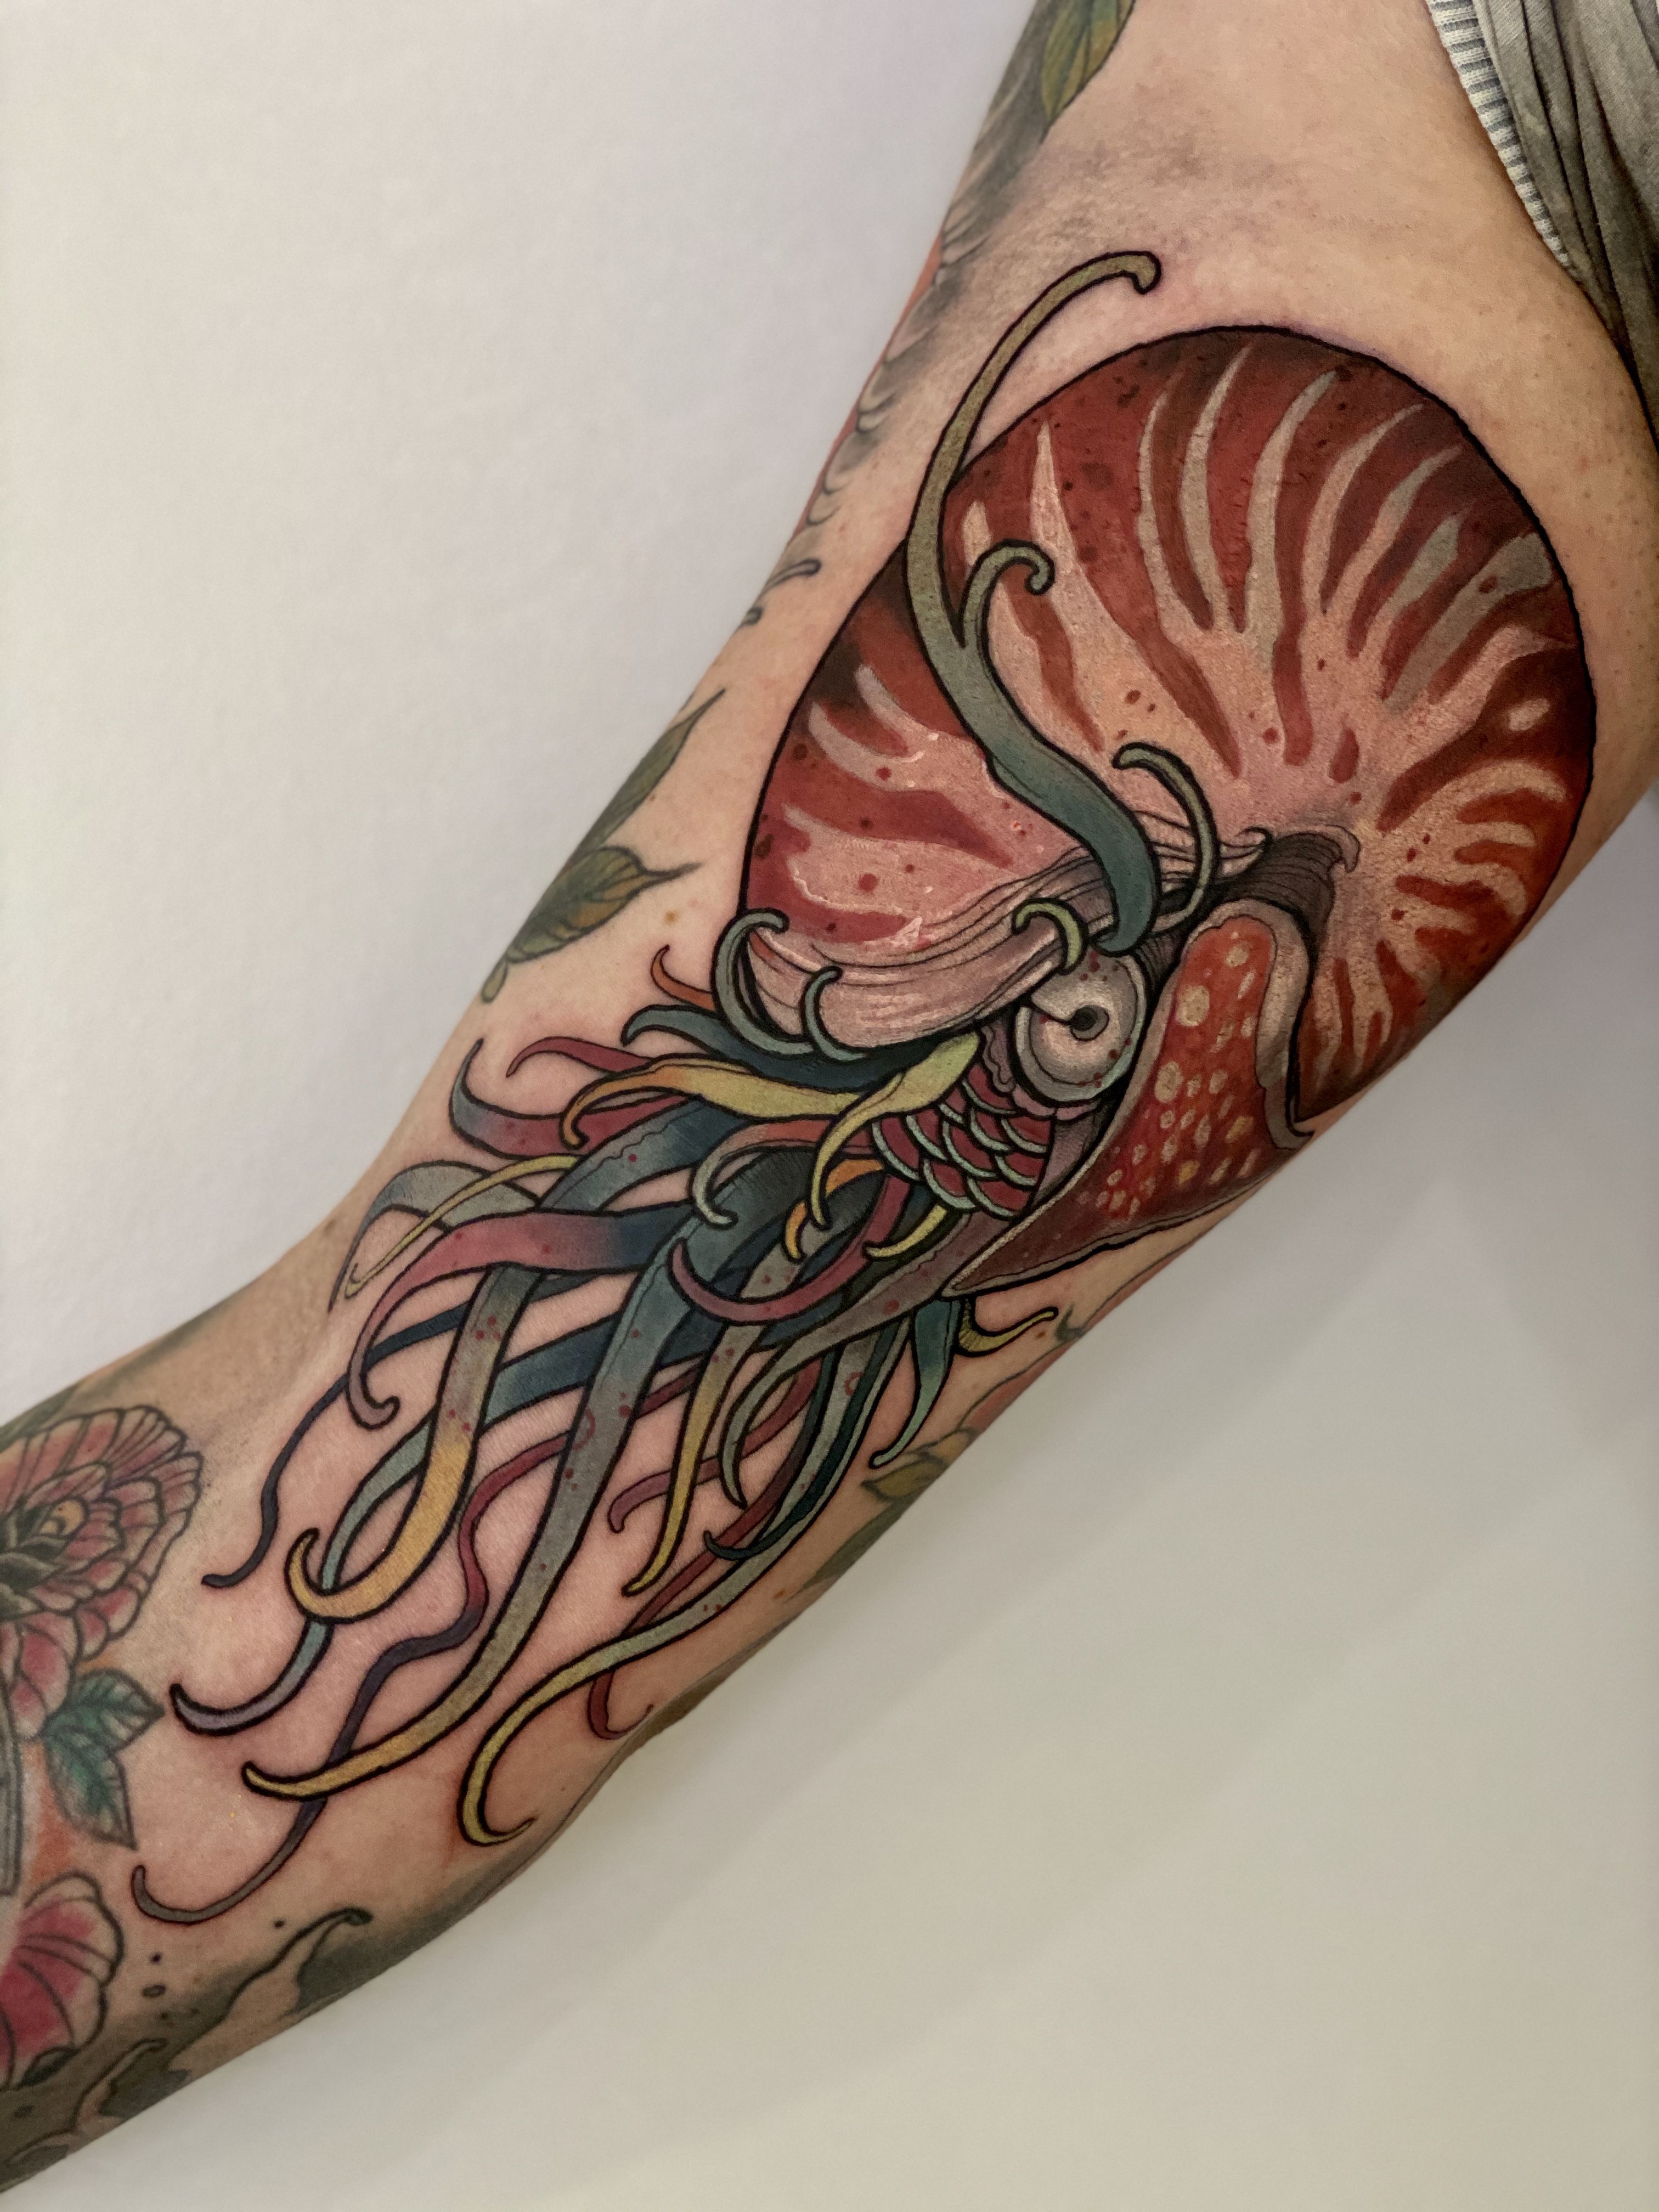 Finished Jelly Tattoo by ToxicElliefish on DeviantArt